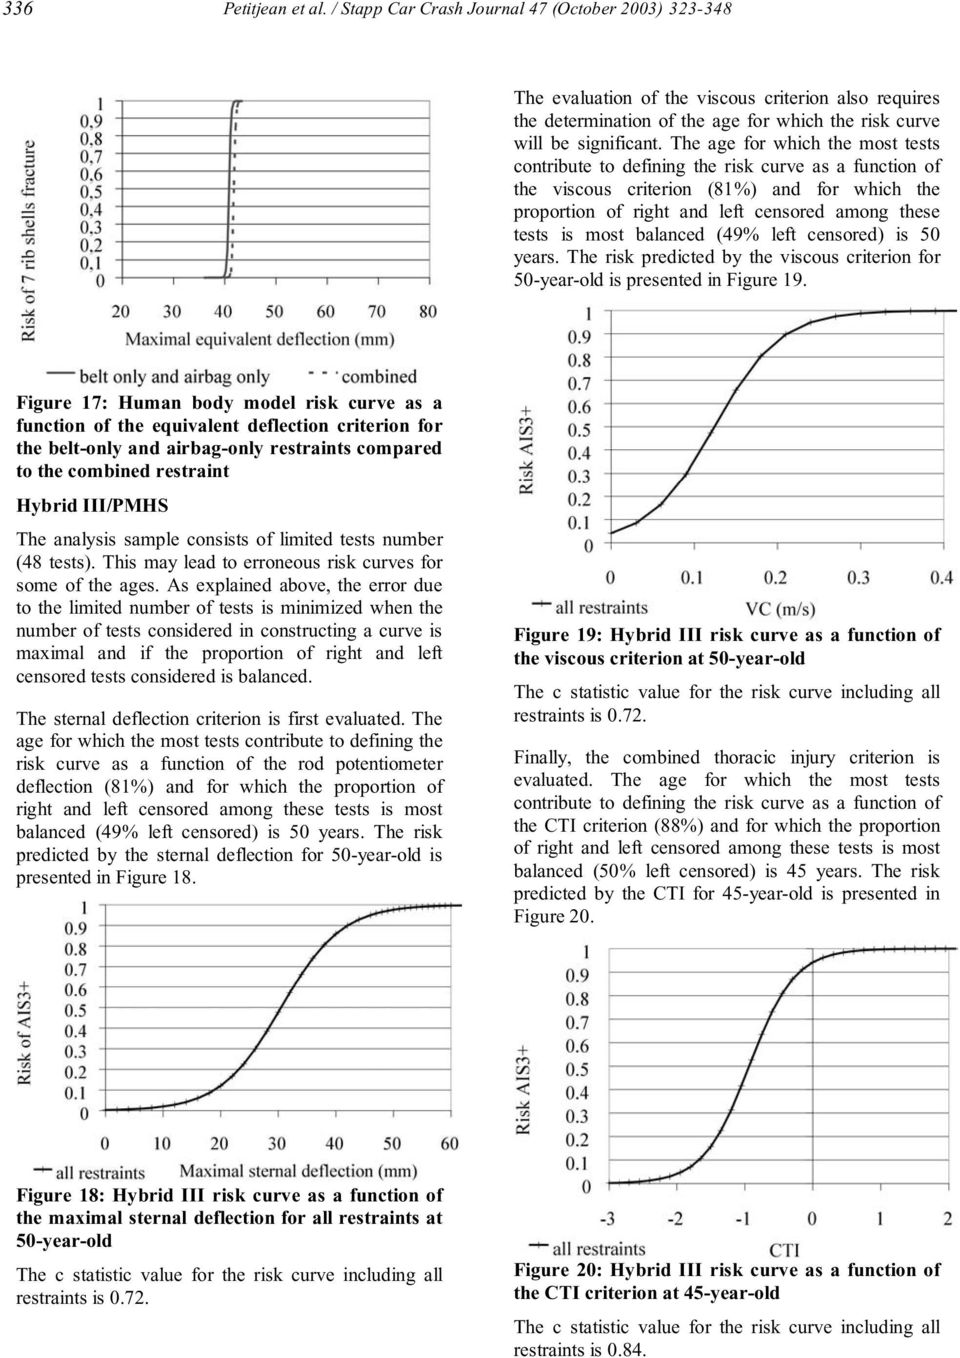 The age for which the most tests contribute to defining the risk curve as a function of the viscous criterion (81%) and for which the proportion of right and left censored among these tests is most